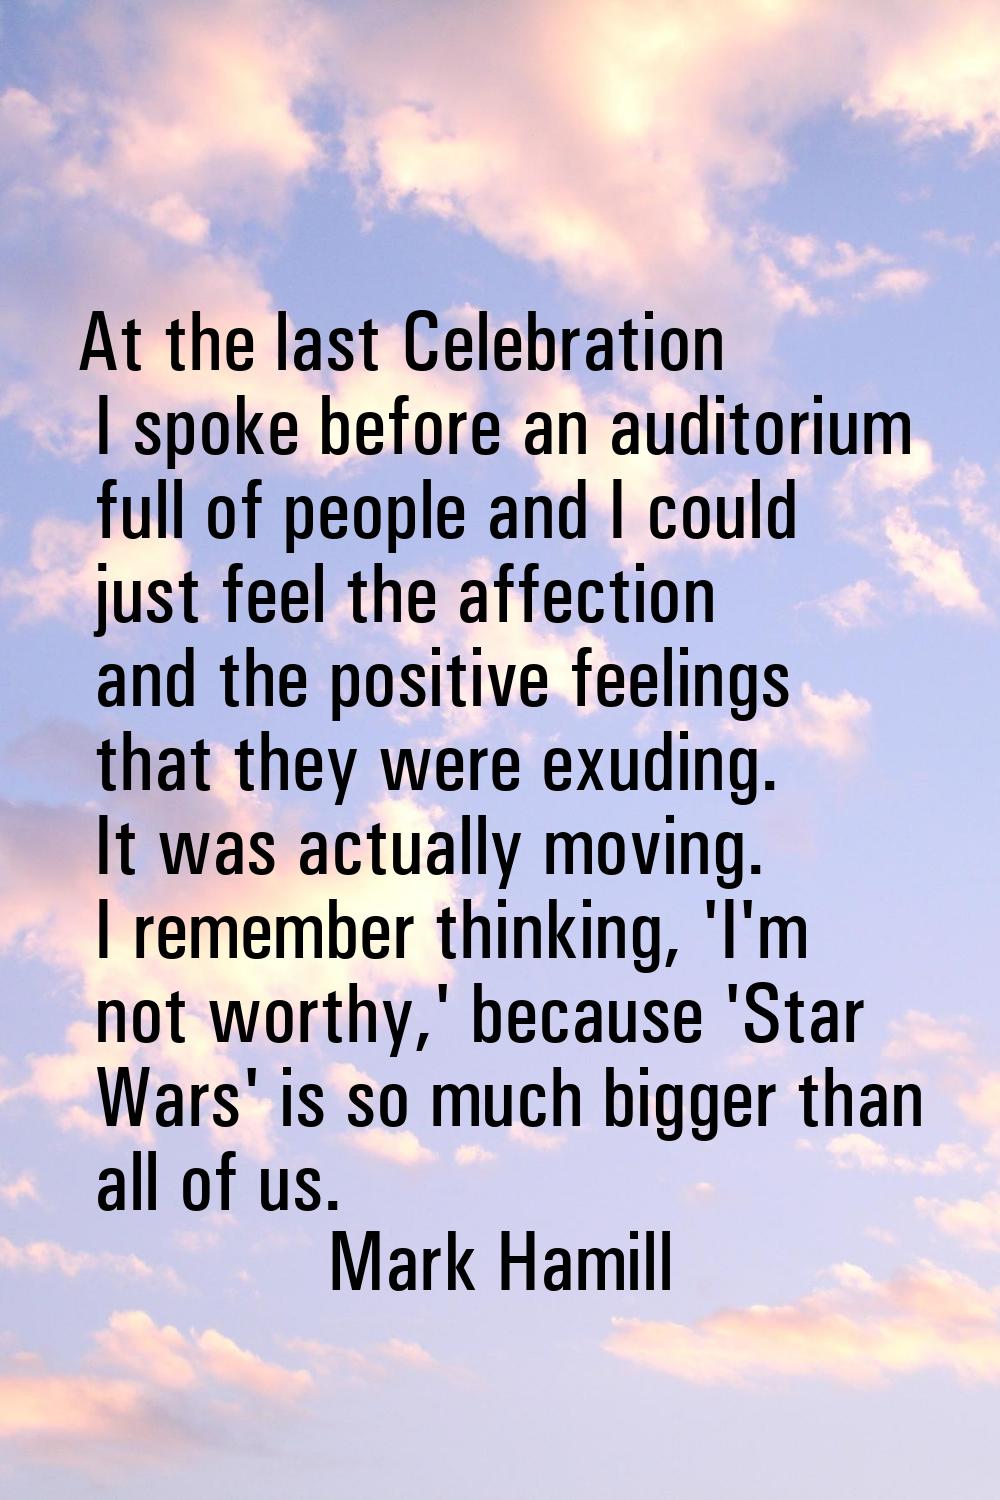 At the last Celebration I spoke before an auditorium full of people and I could just feel the affec